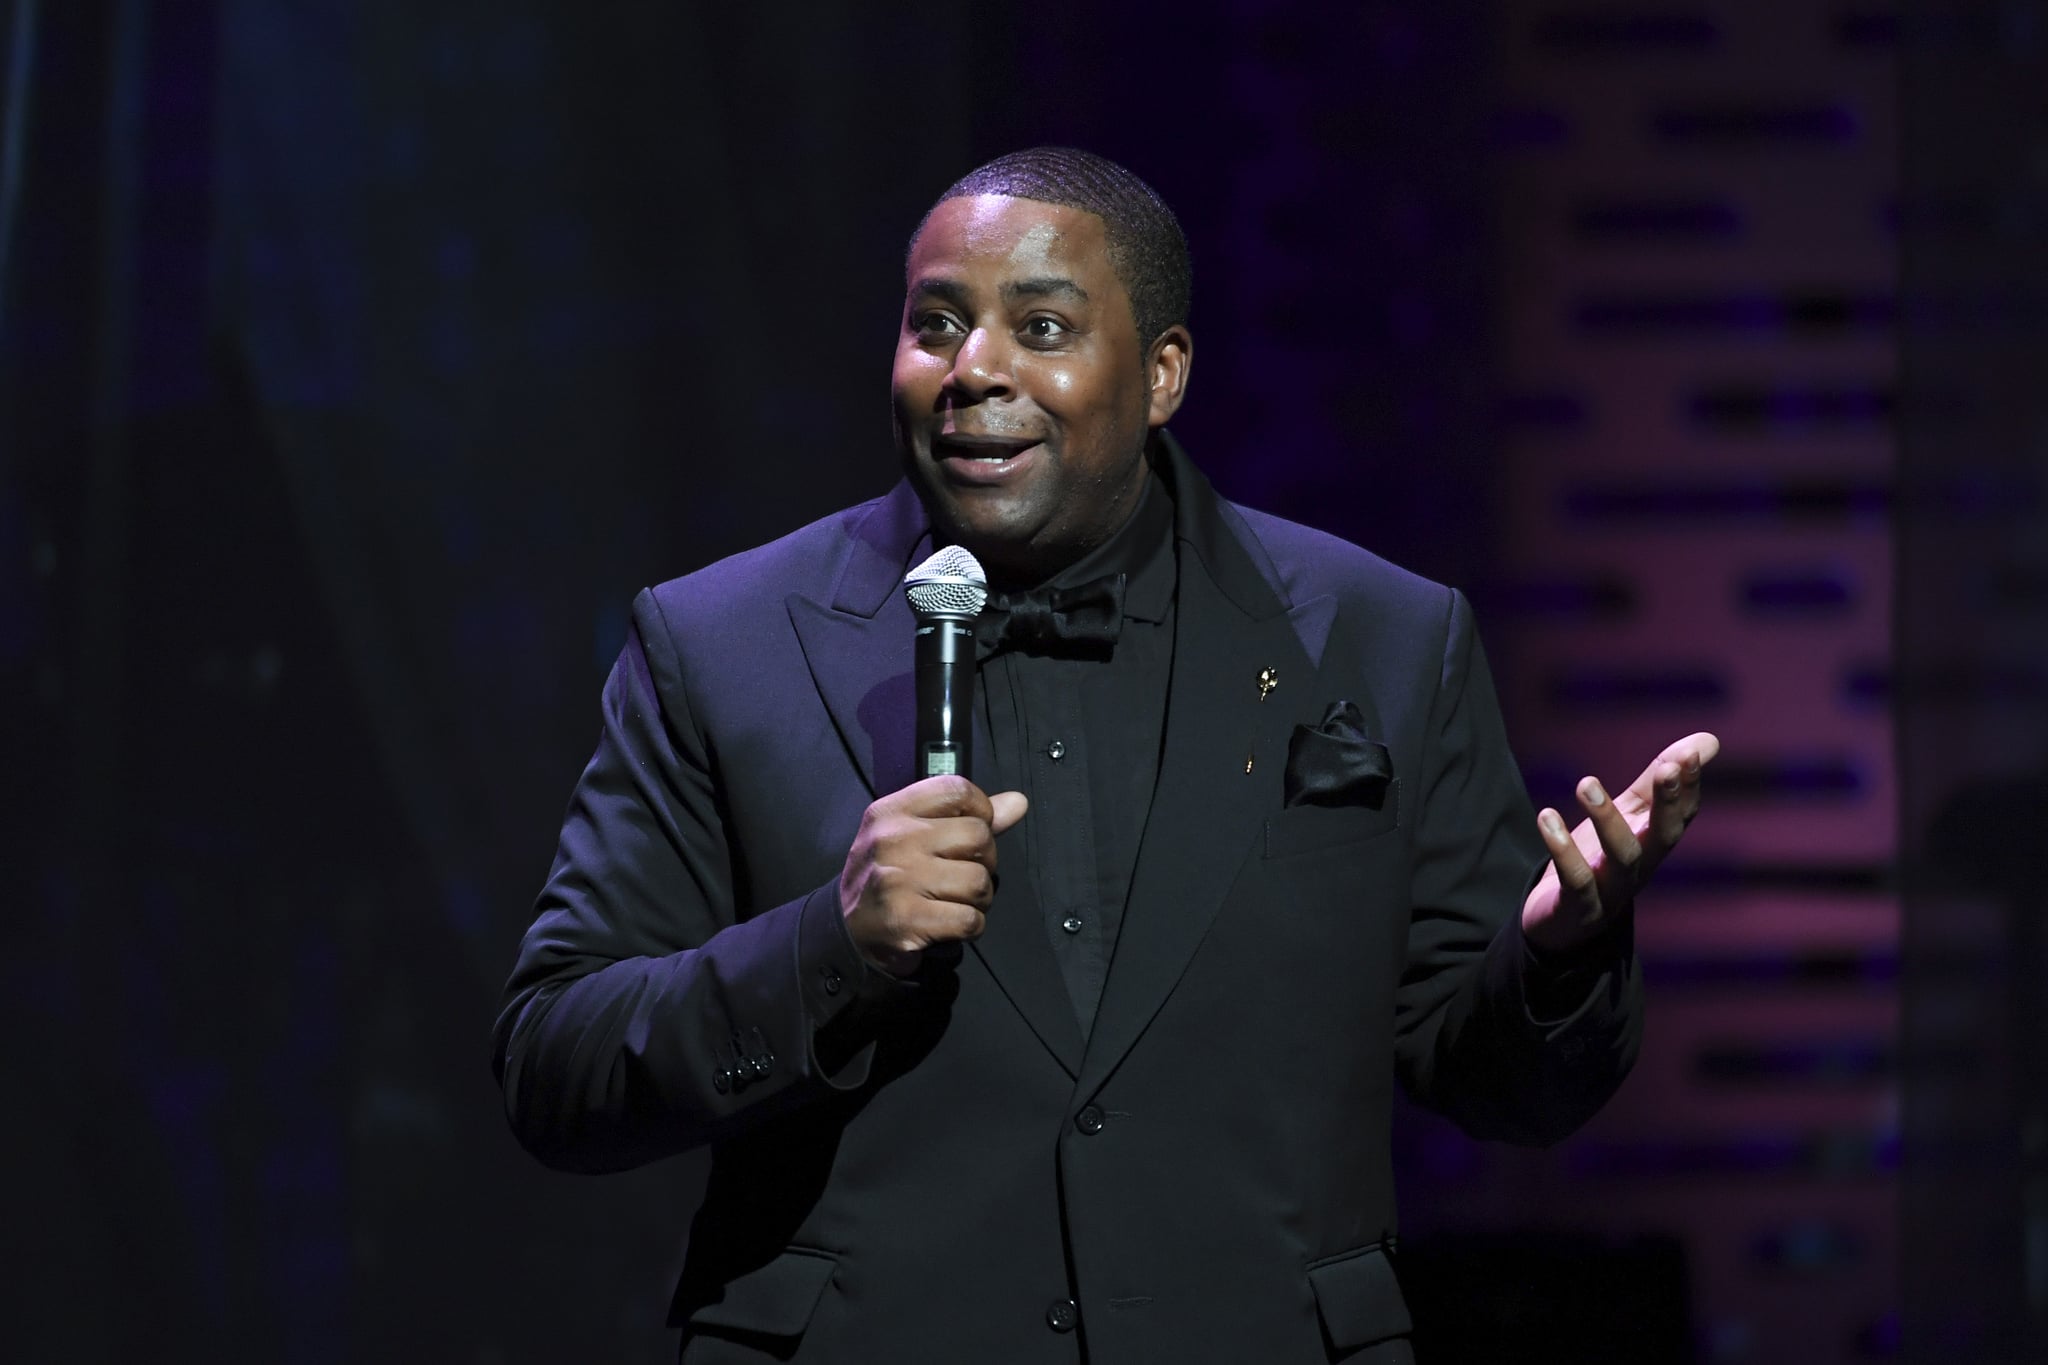 NEW YORK, NEW YORK - JUNE 13: Kenan Thompson hosts Apollo Theatre Spring Benefit at The Apollo Theatre on June 13, 2022 in New York City. (Photo by Shahar Azran/Getty Images)